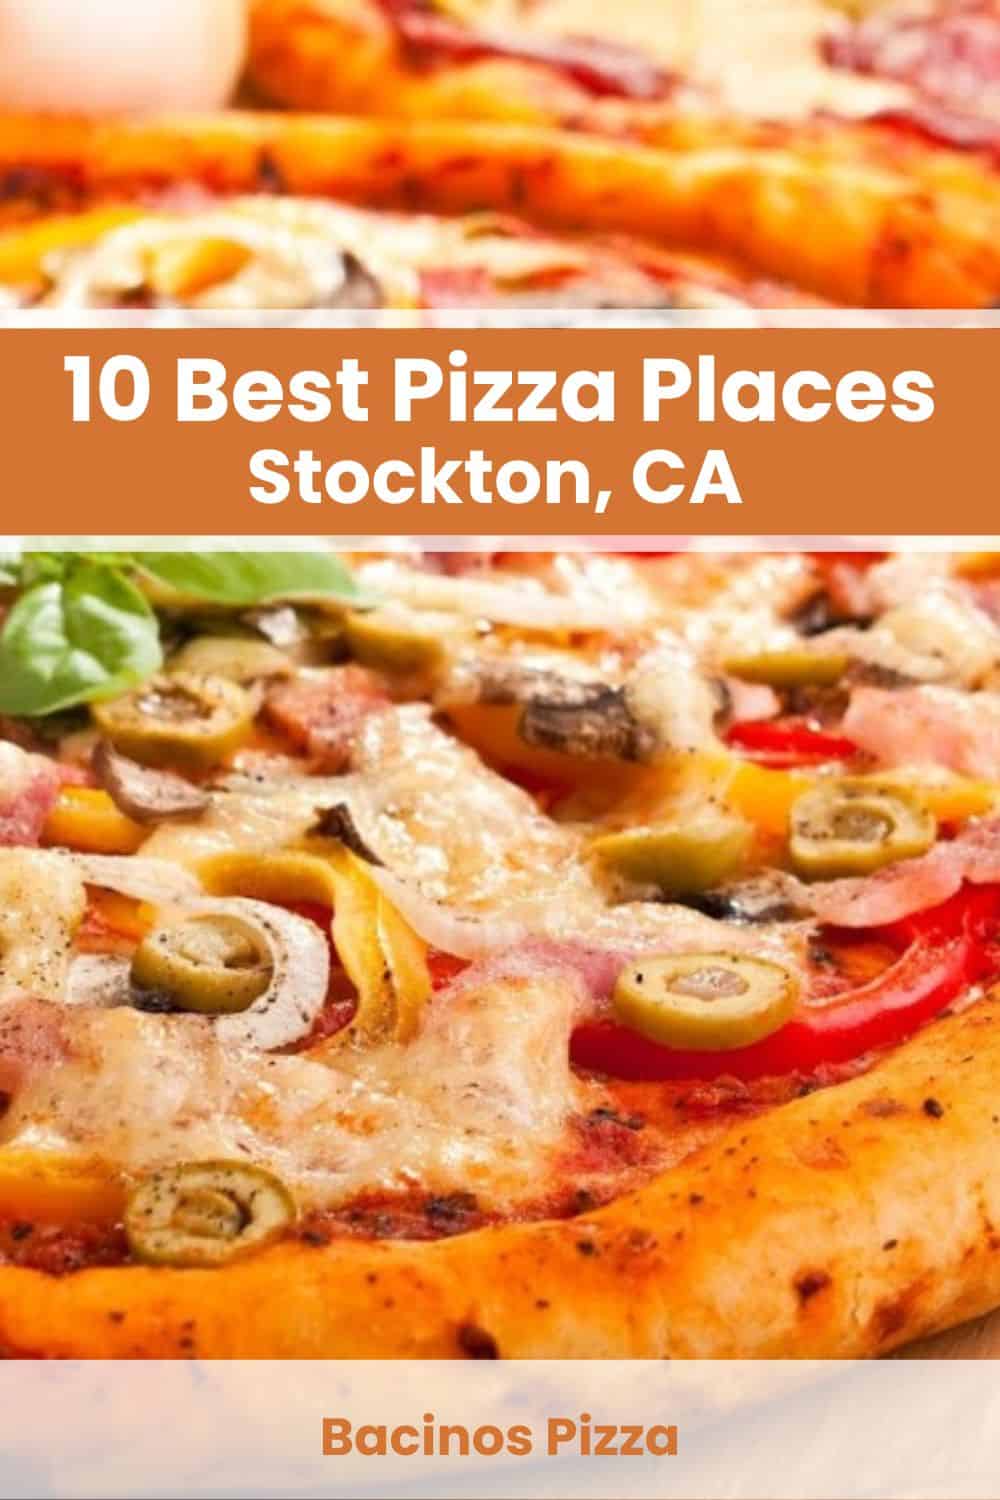 Best Pizza Places in Stockton